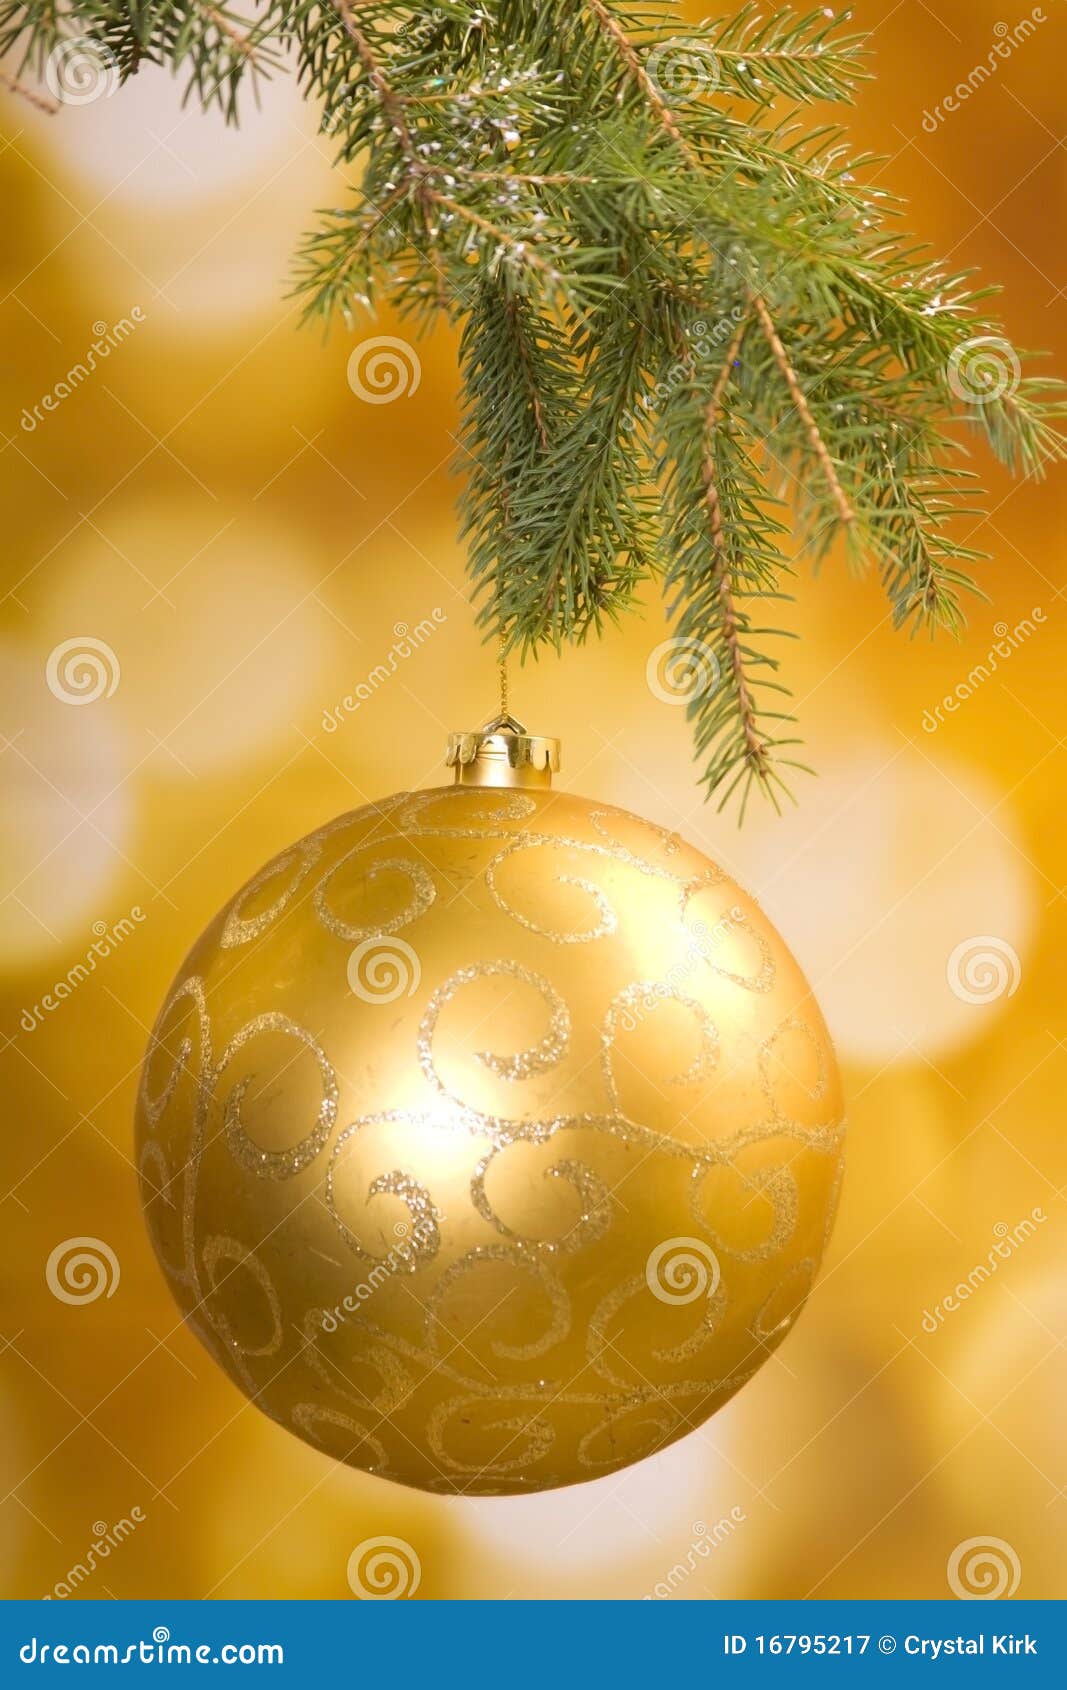 Christmas in gold stock image. Image of ornament, celebration - 16795217